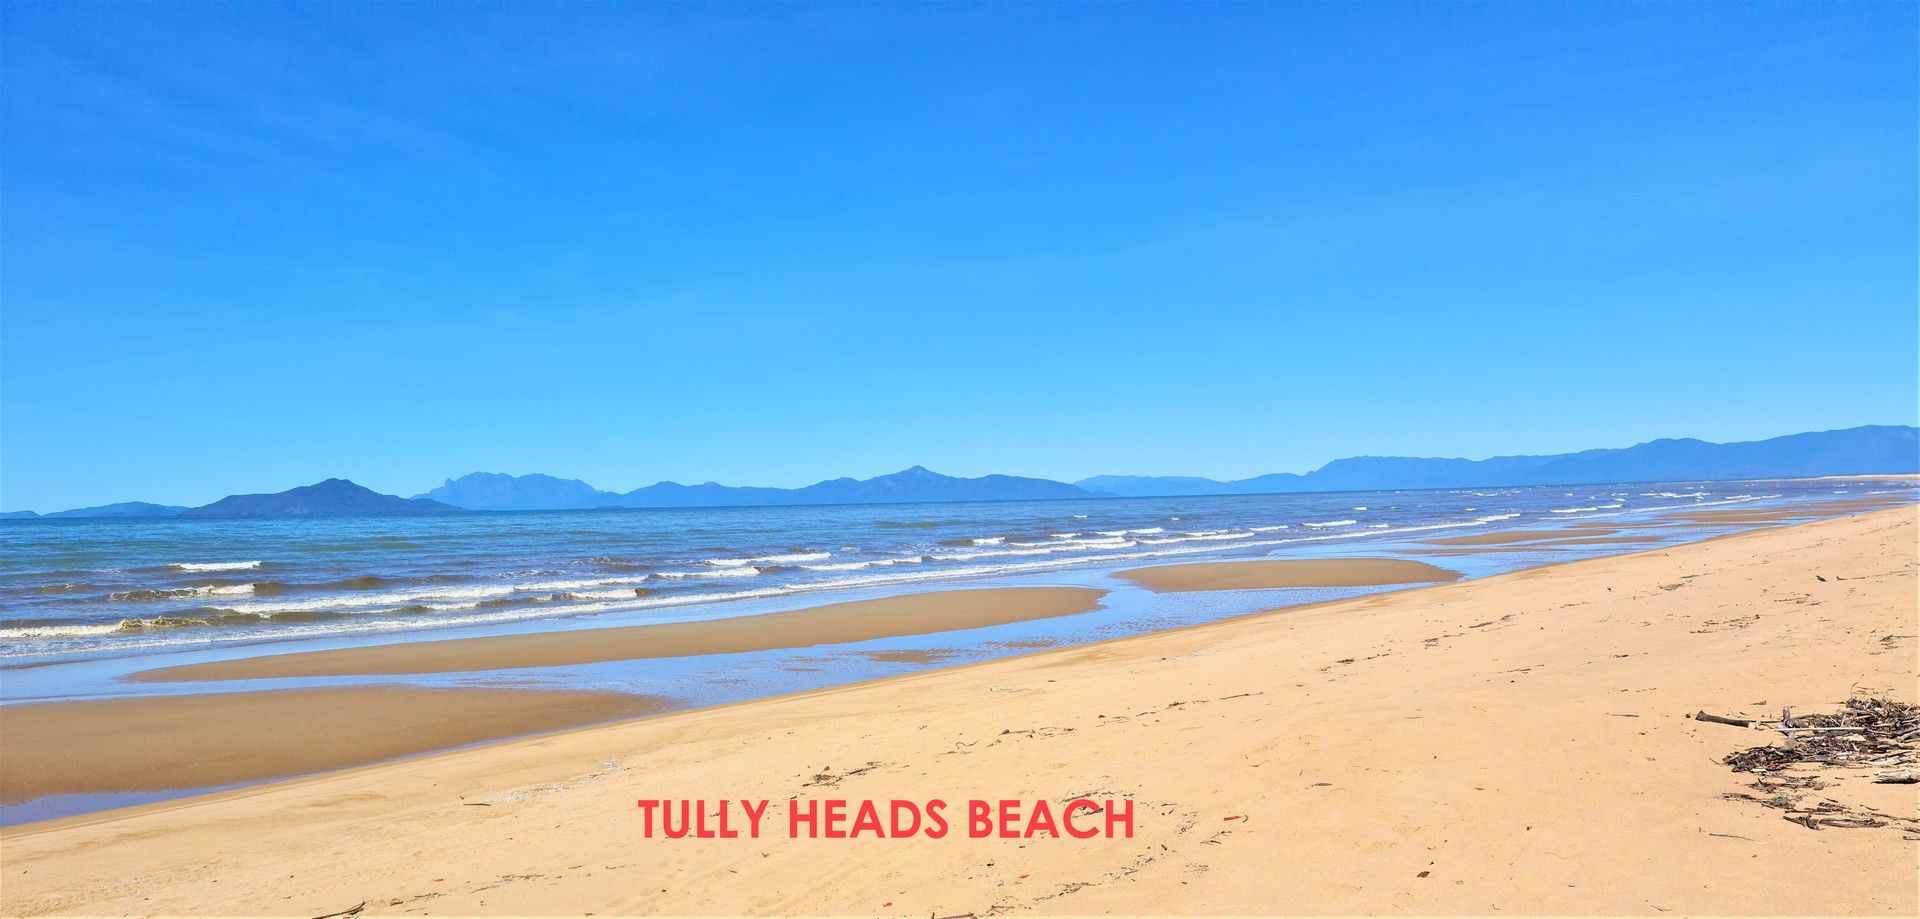 23 TAYLOR STREET, Tully Heads QLD 4854, Image 0